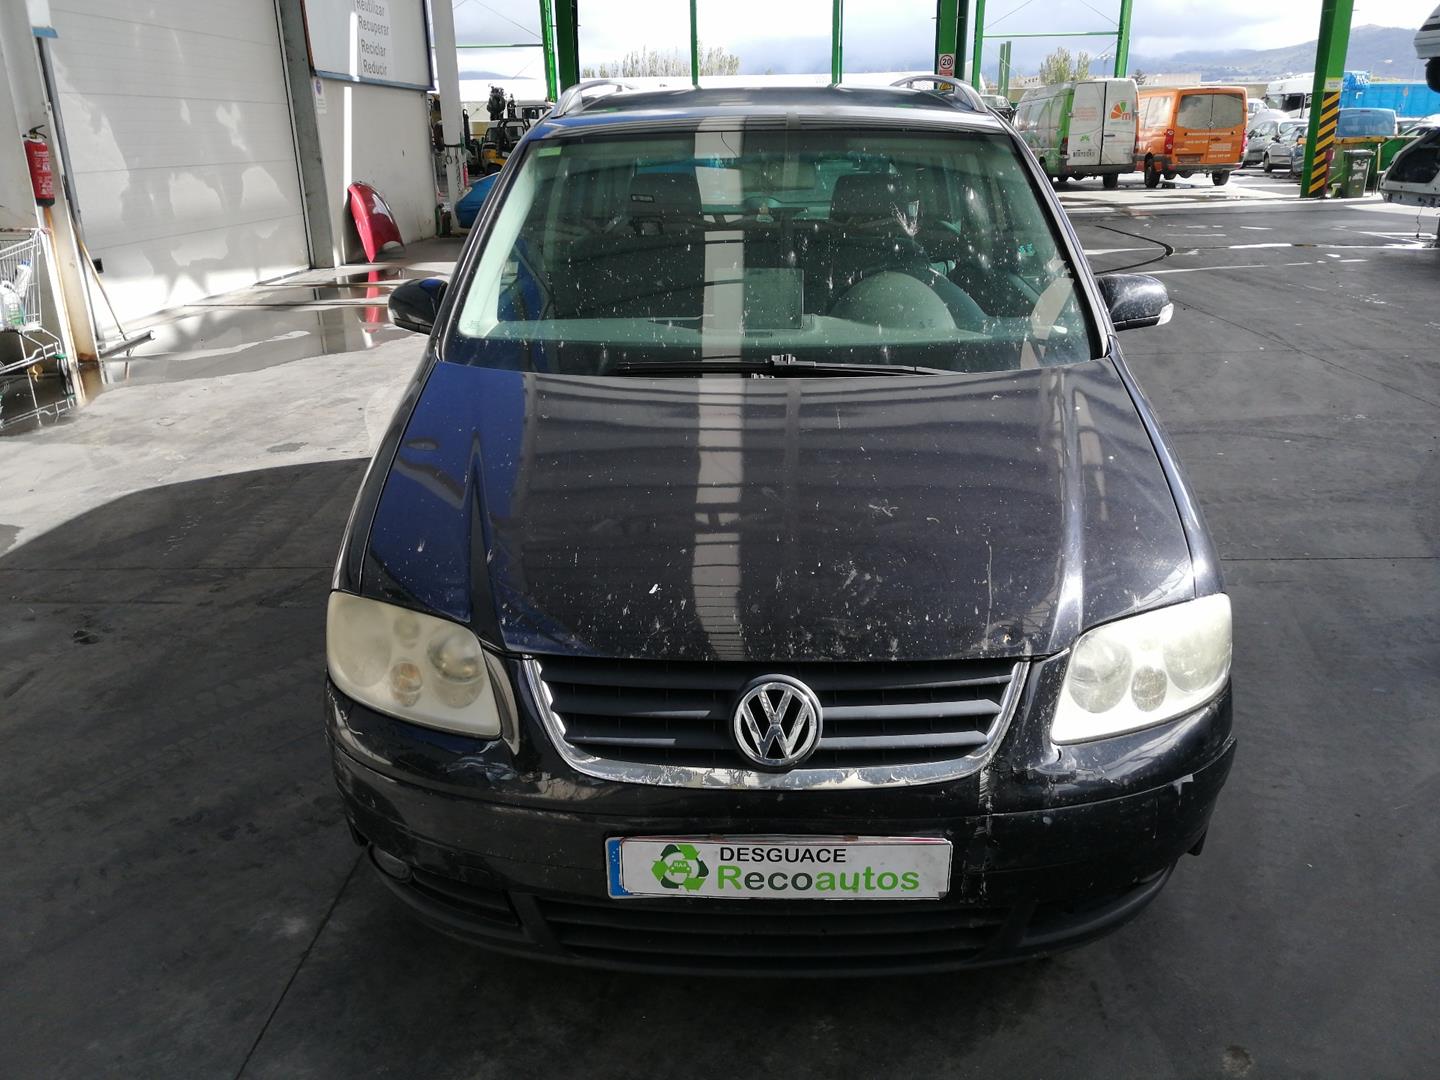 VOLKSWAGEN Touran 1 generation (2003-2015) Other Body Parts 1T1721503H, 6PV00868900, HELLA 24161920